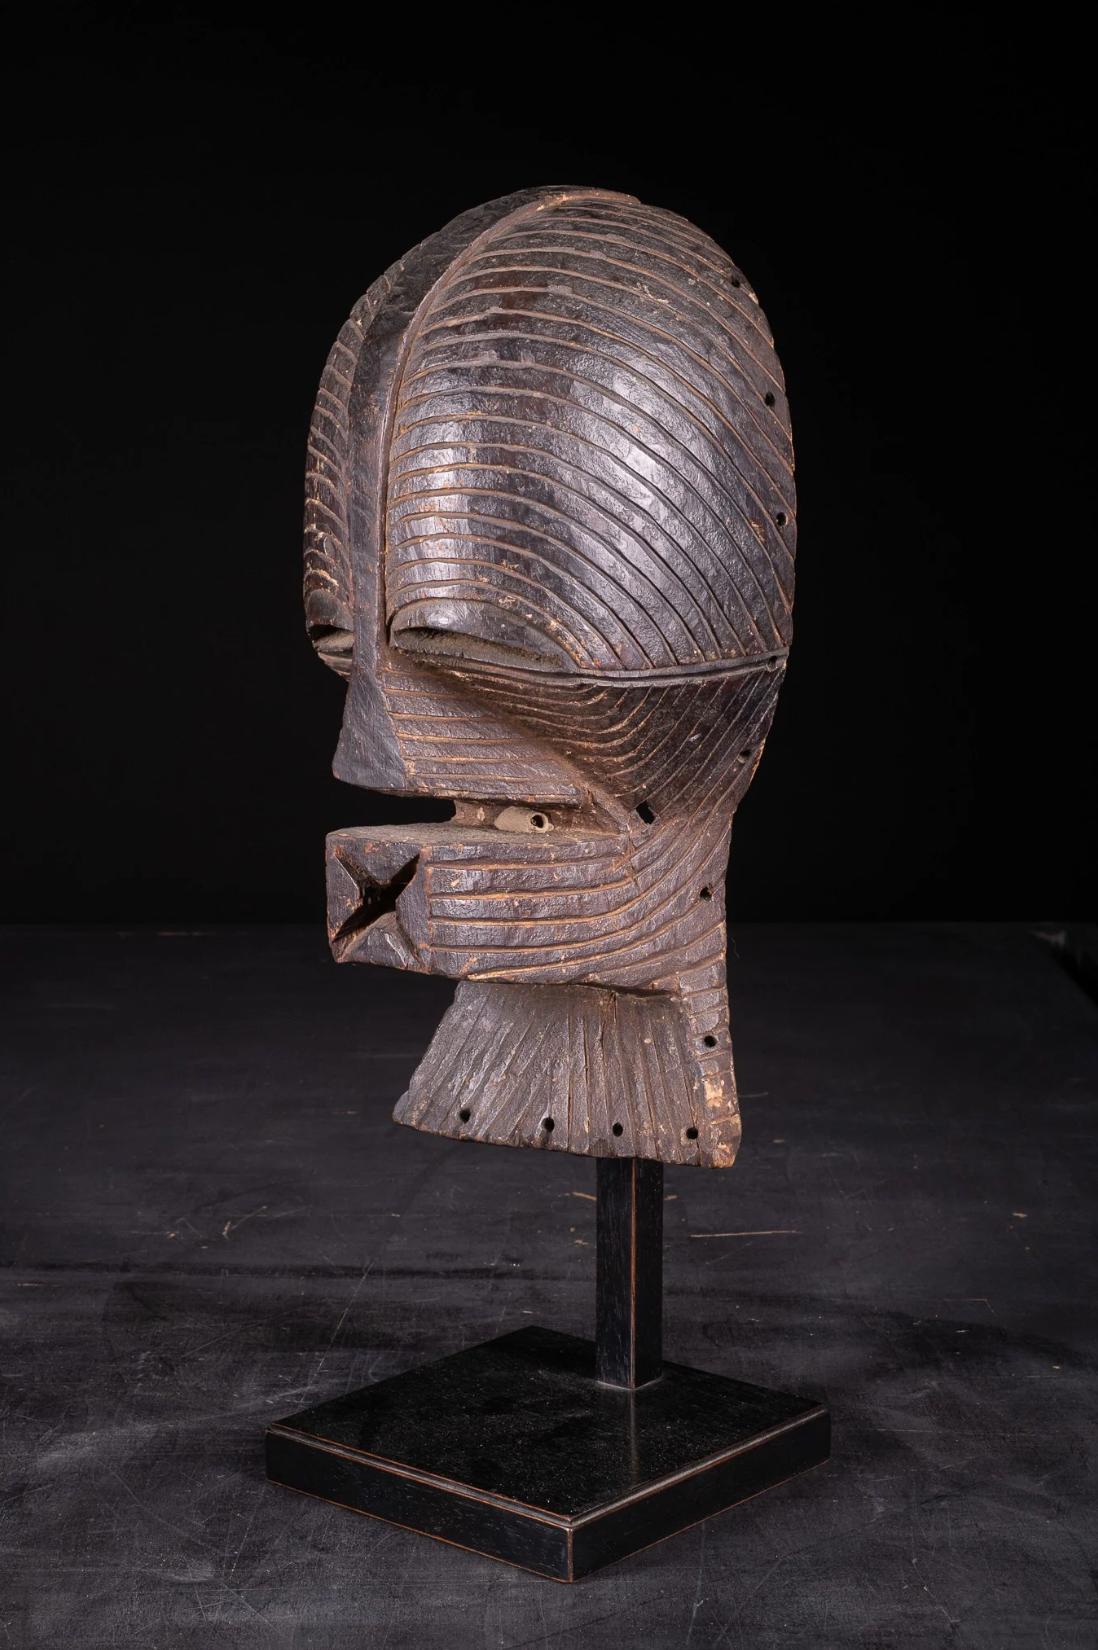 Traditionally, Kifwebe masks were created and worn by members of the secret masking society, Bwadi Bwa Kifwebe, of the Luba and the Songye People living in the central part of the Congo. They danced, representing spirits connecting this world with